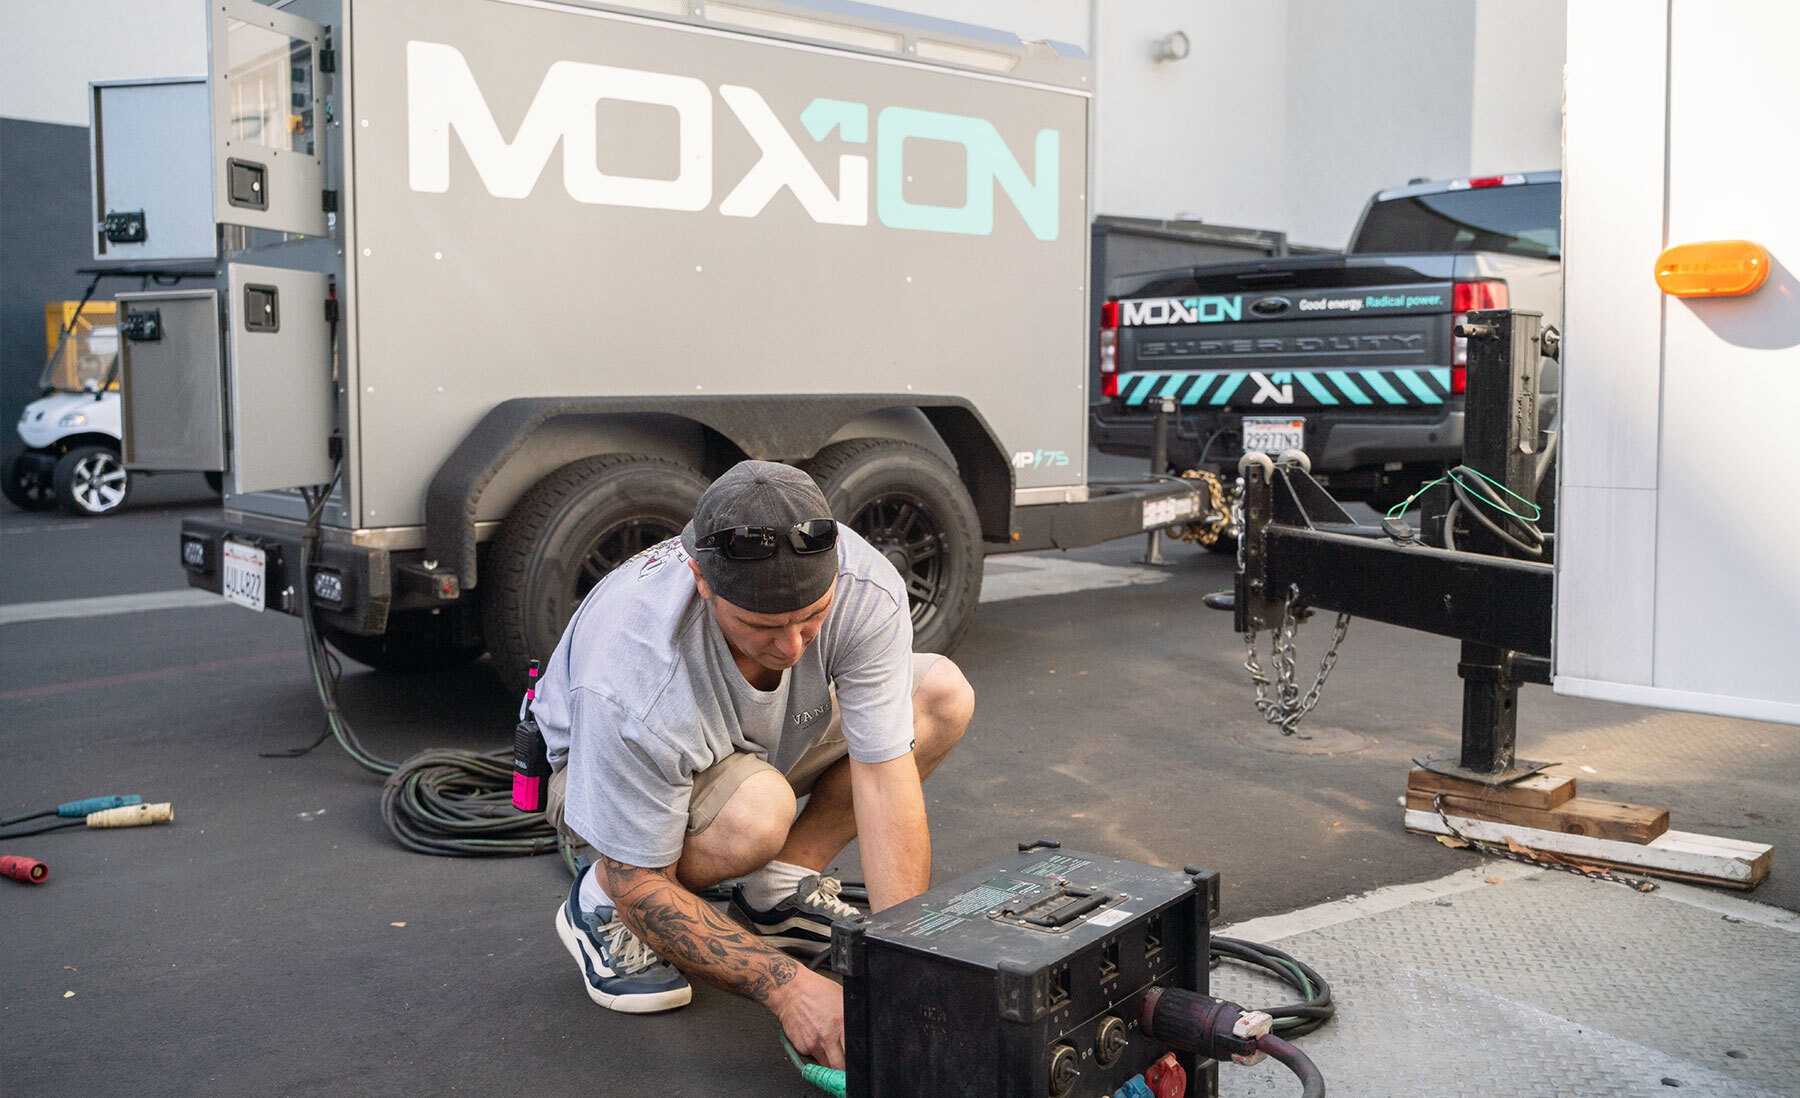 Man in casual clothes bending down to adjust some technical equipment in the backlot of a movie studio. Behind him is a Moxion truck and trailer.